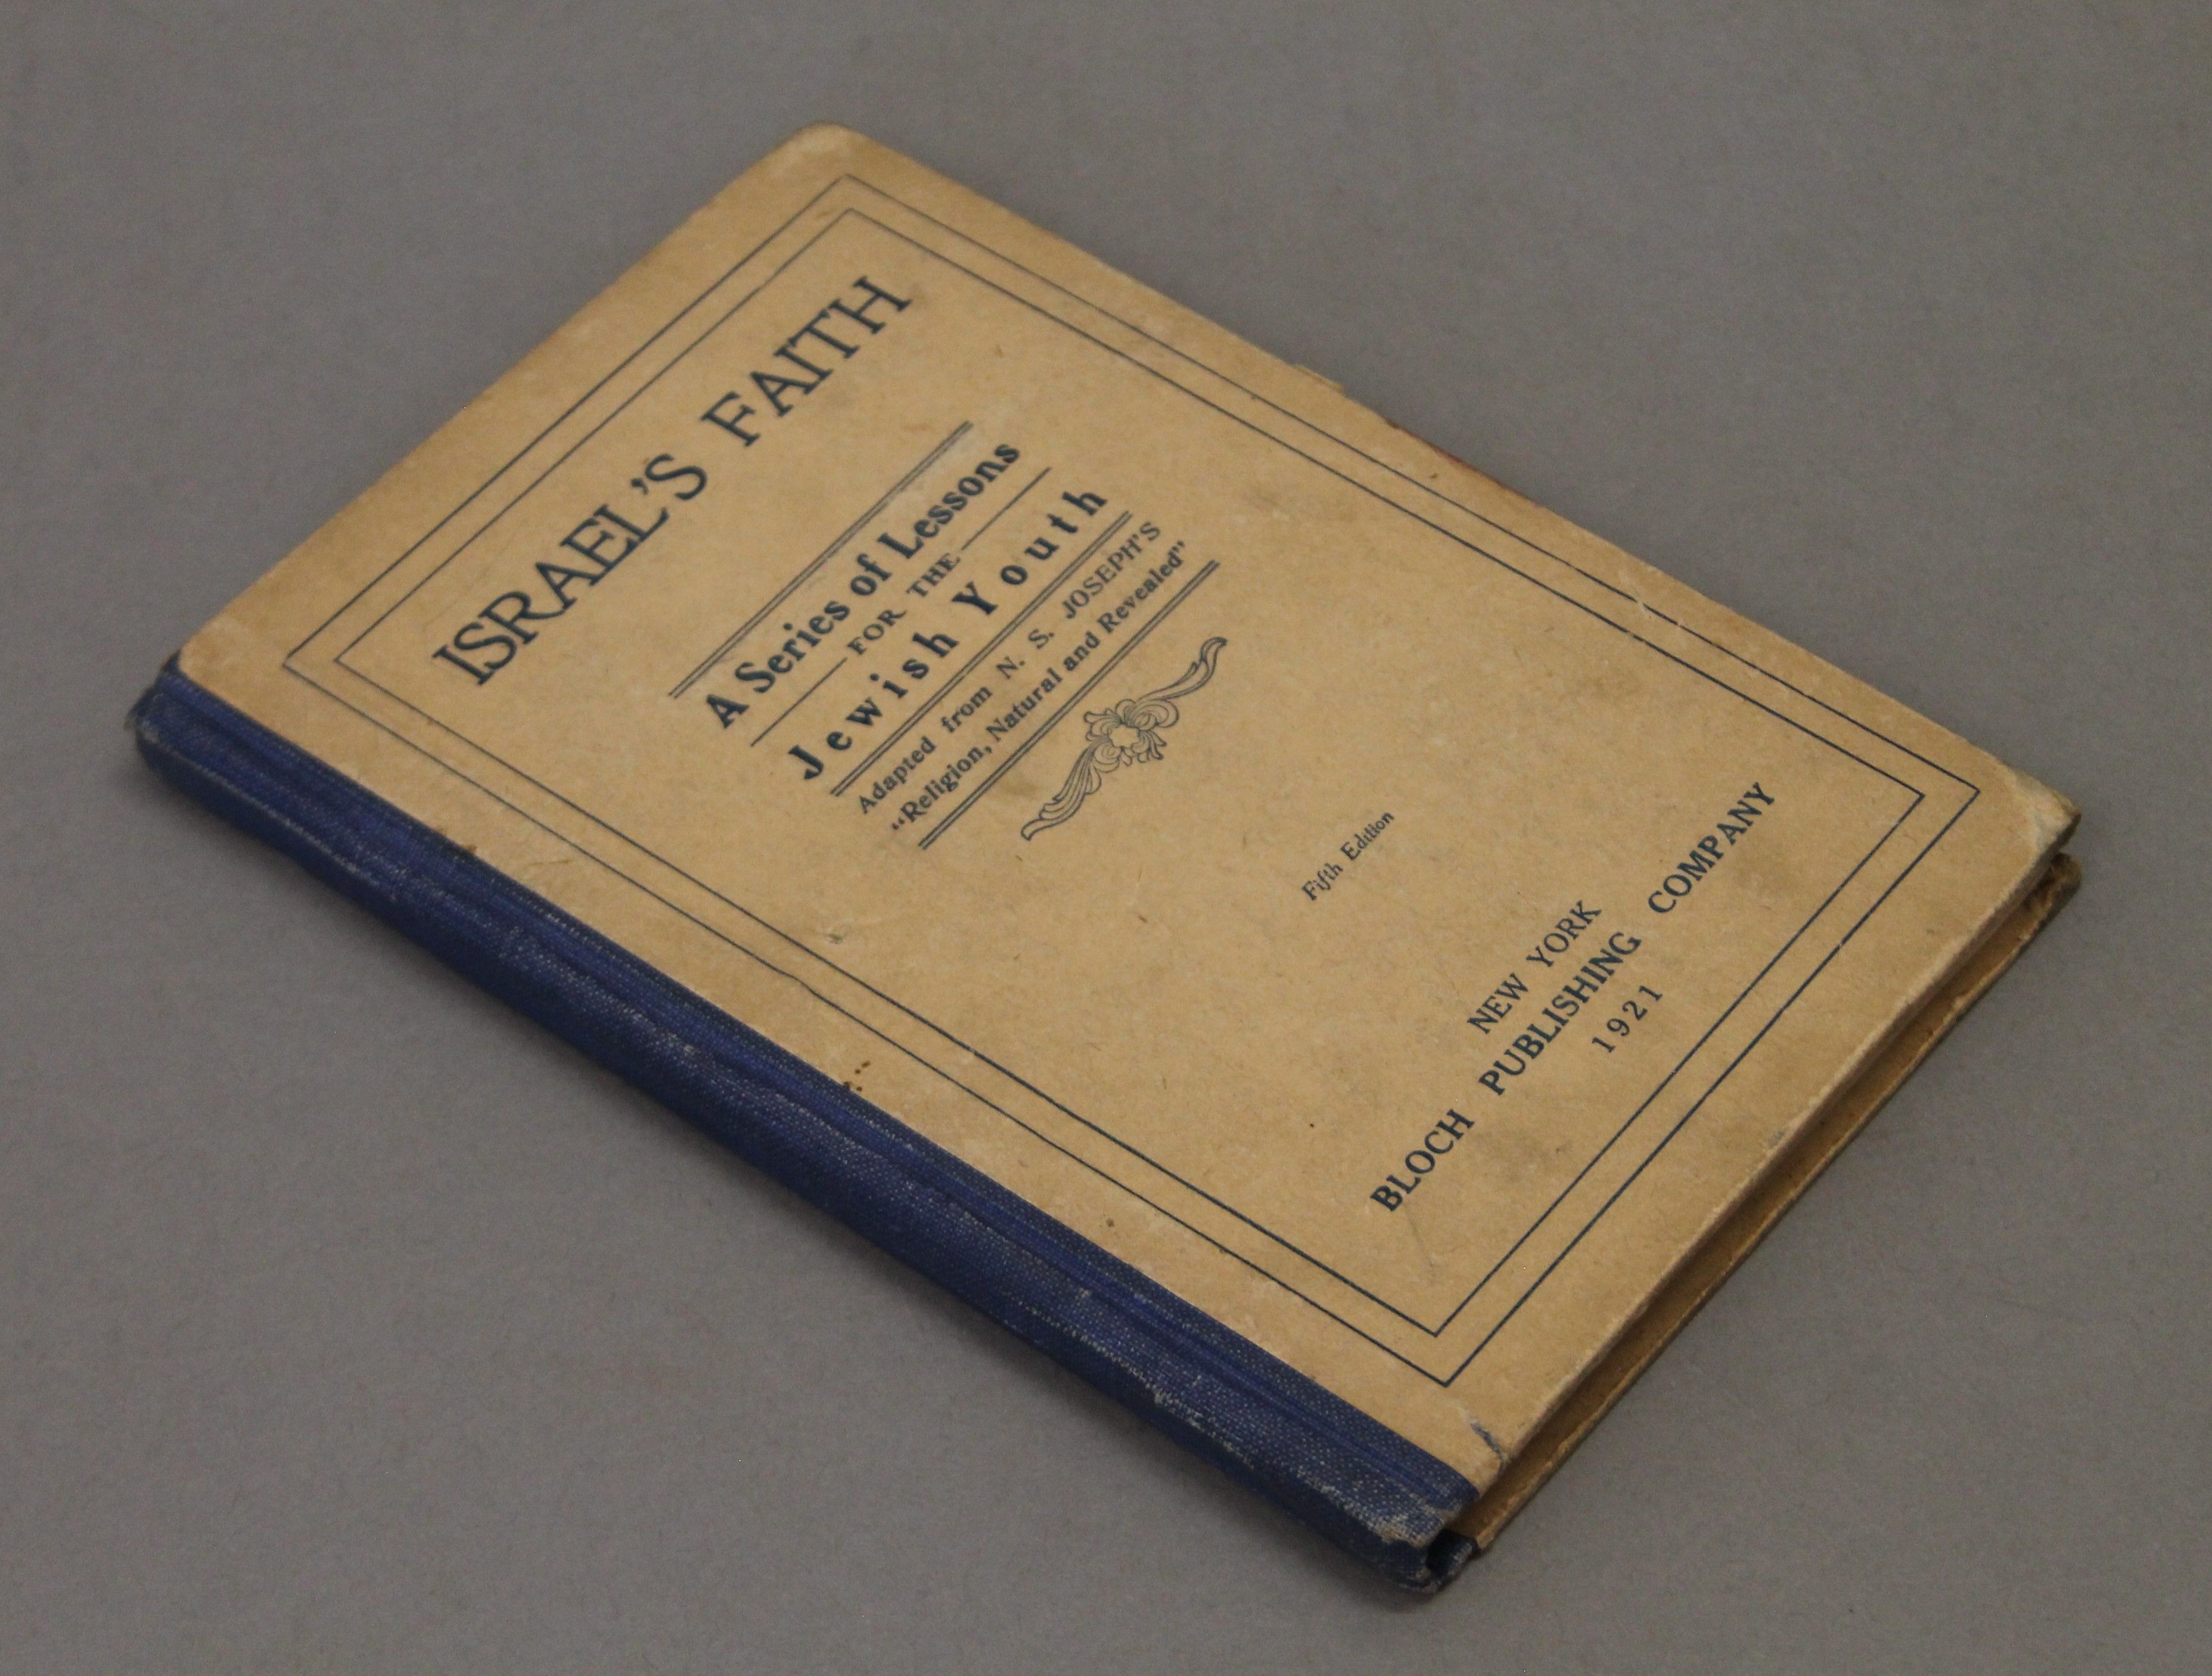 Jewish Opinion, The Bulletin of the League of Jews, 1919; and nine other Jewish titles. - Image 39 of 42